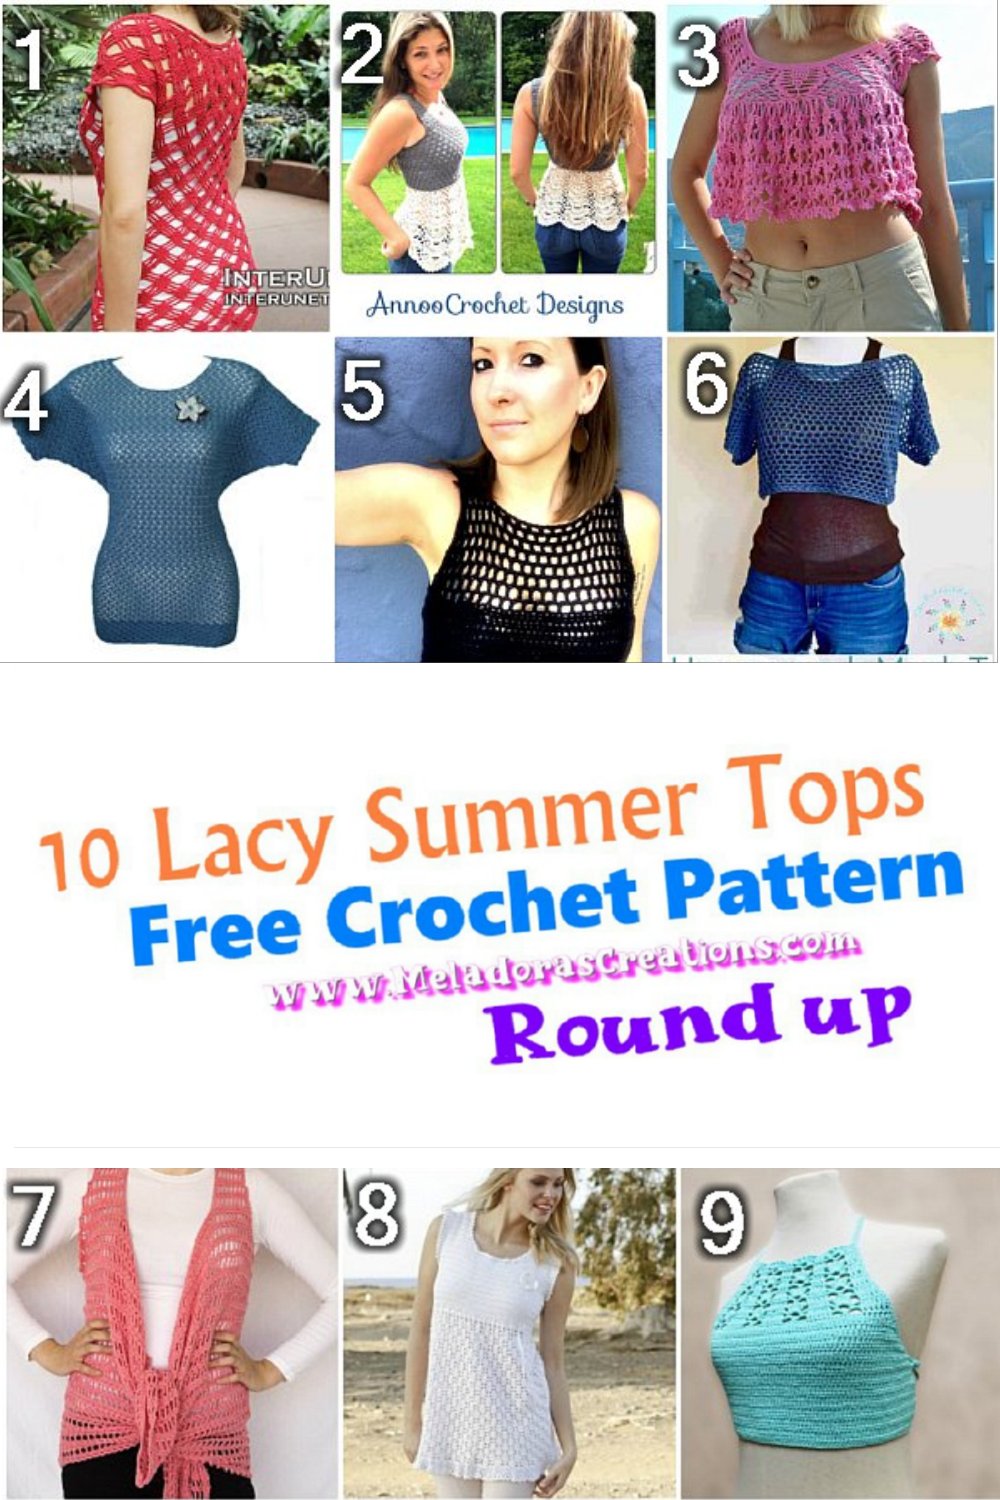 10 lacy summer tops – Free Crochet Pattern round up – Meladora's Creations